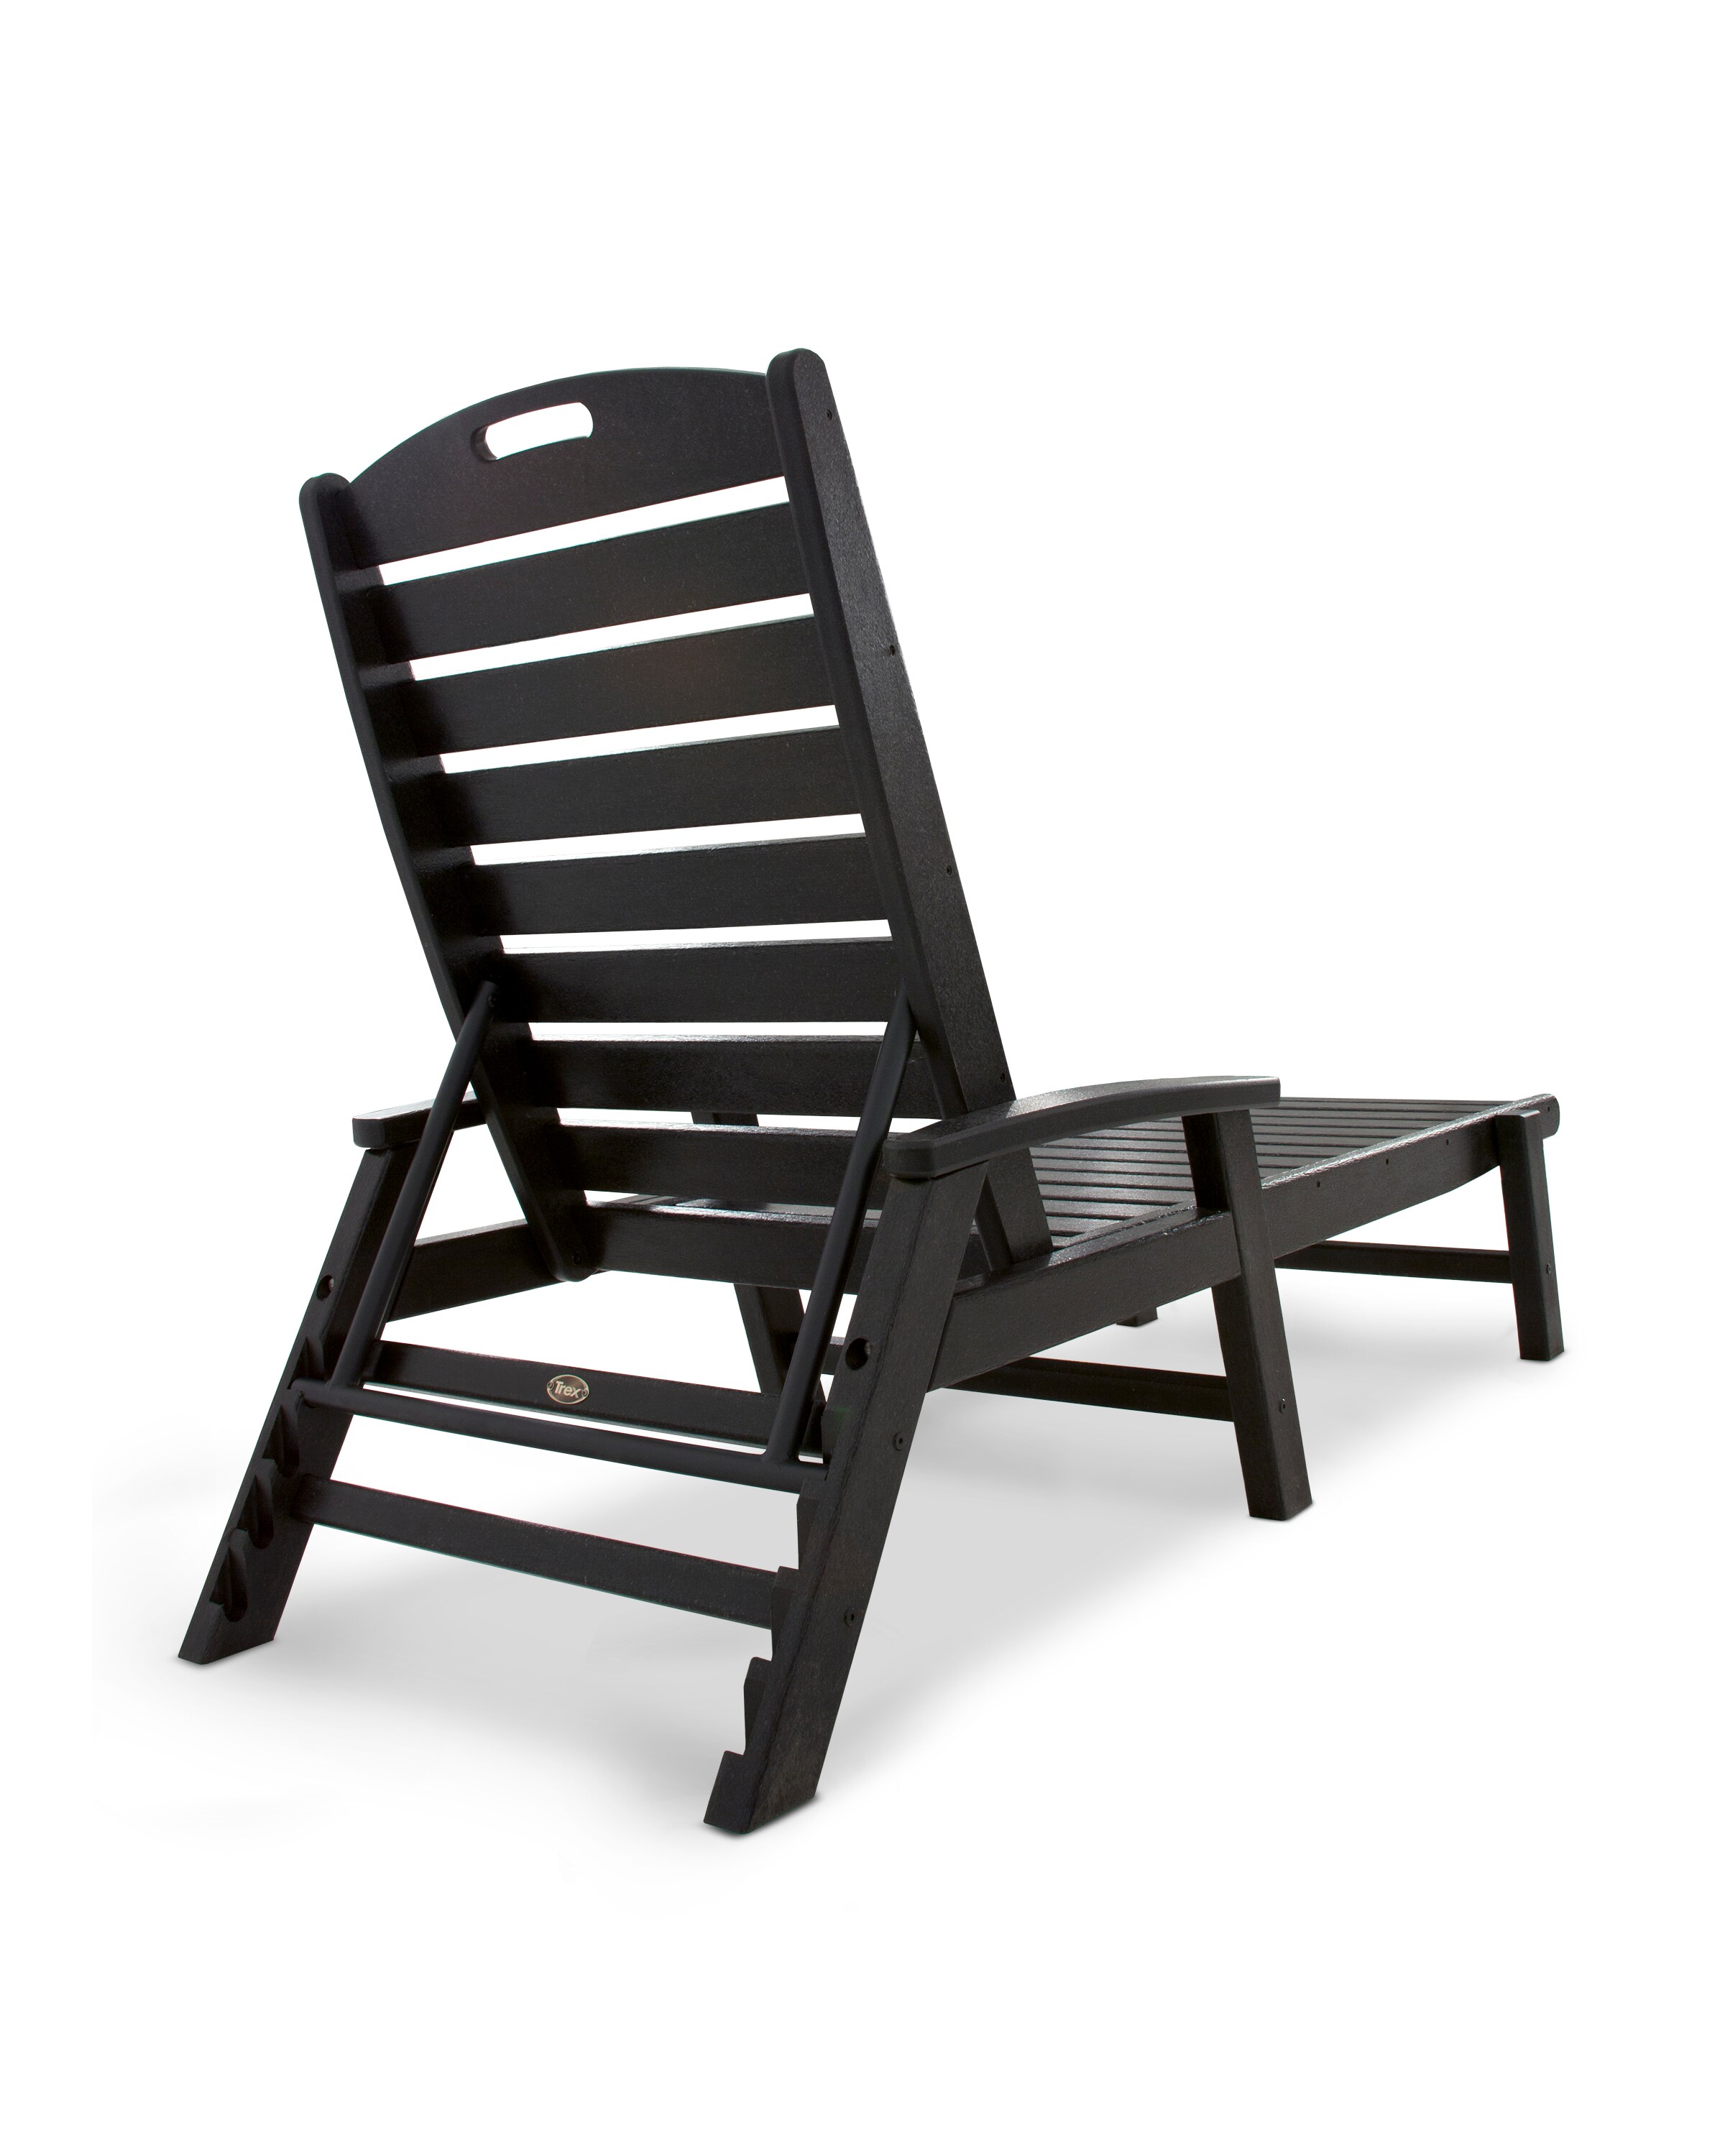 Trex Outdoor Furniture Yacht Club Black Plastic Frame Stationary Chaise Lounge Chairs With 